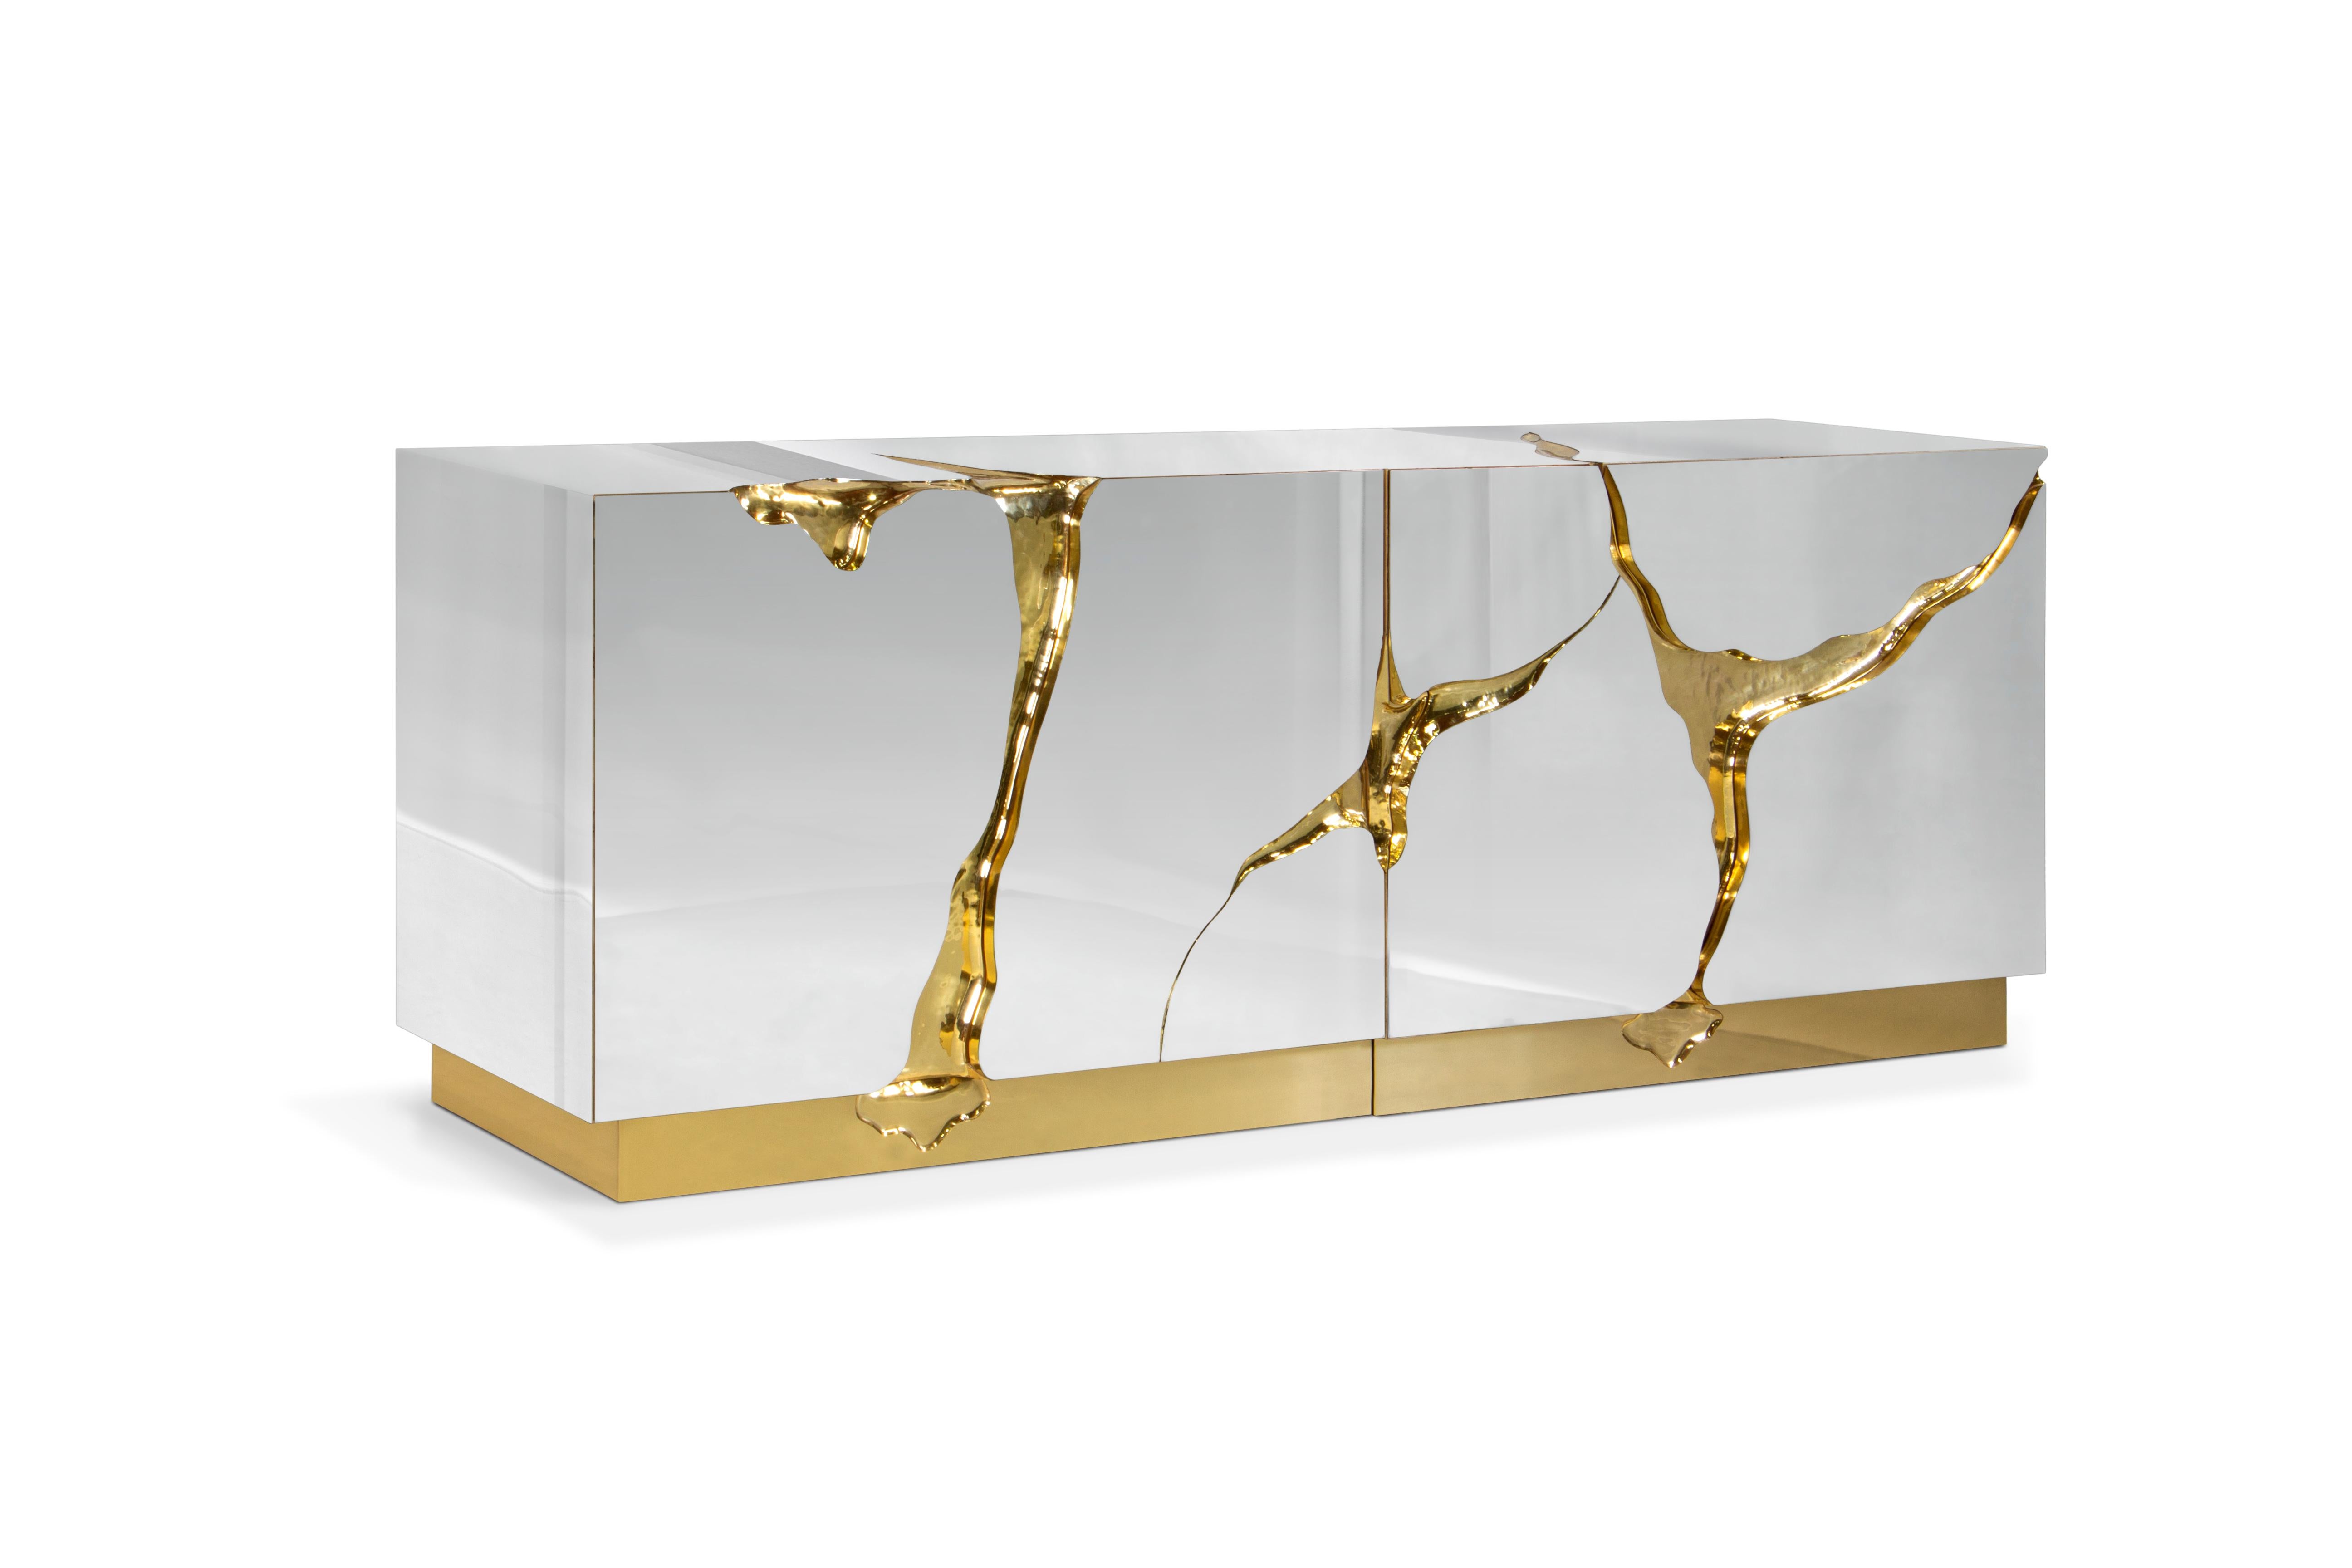 Carved Modern Contemporary Lapiaz Gold Details Sideboard by Boca do Lobo For Sale